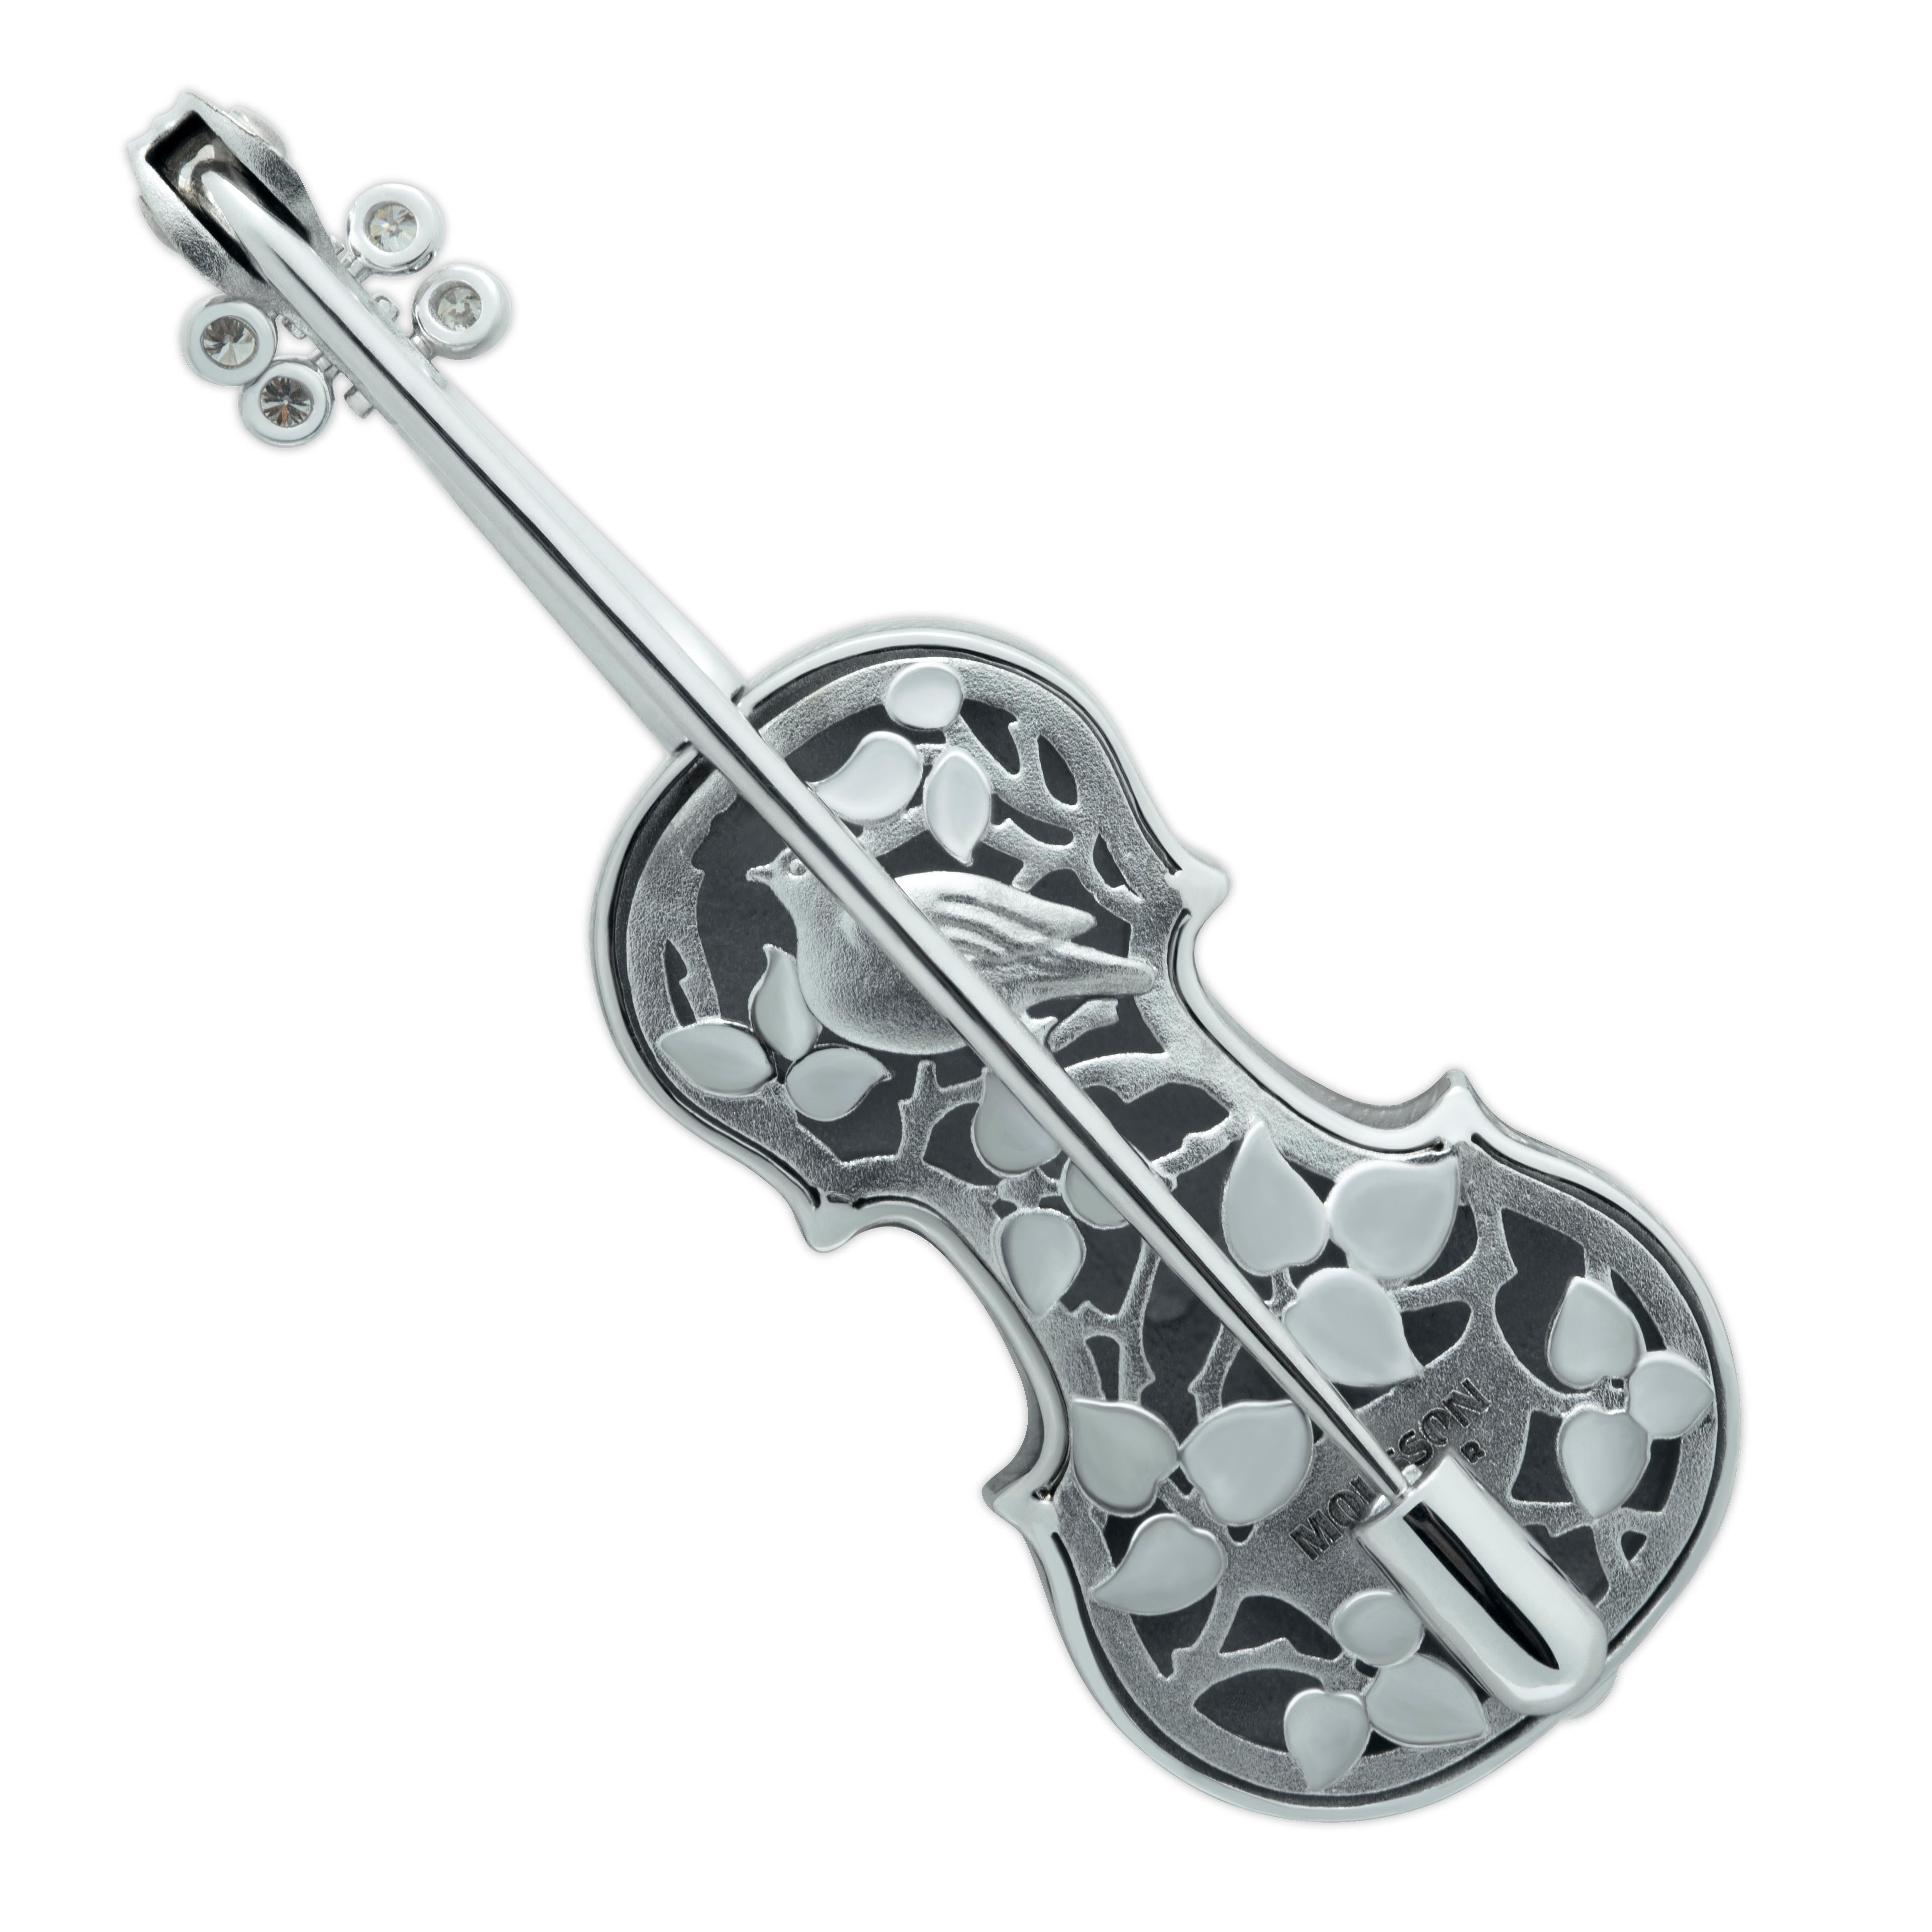 Classical Enamel Diamond 18 Karat White Gold Mini Violin Brooch

This 18K Gold Enamel Violin Brooch is a work of art! Our signature item from Artistic Collection, it boasts realistic texture of real wood and transparent enamel, along with singing